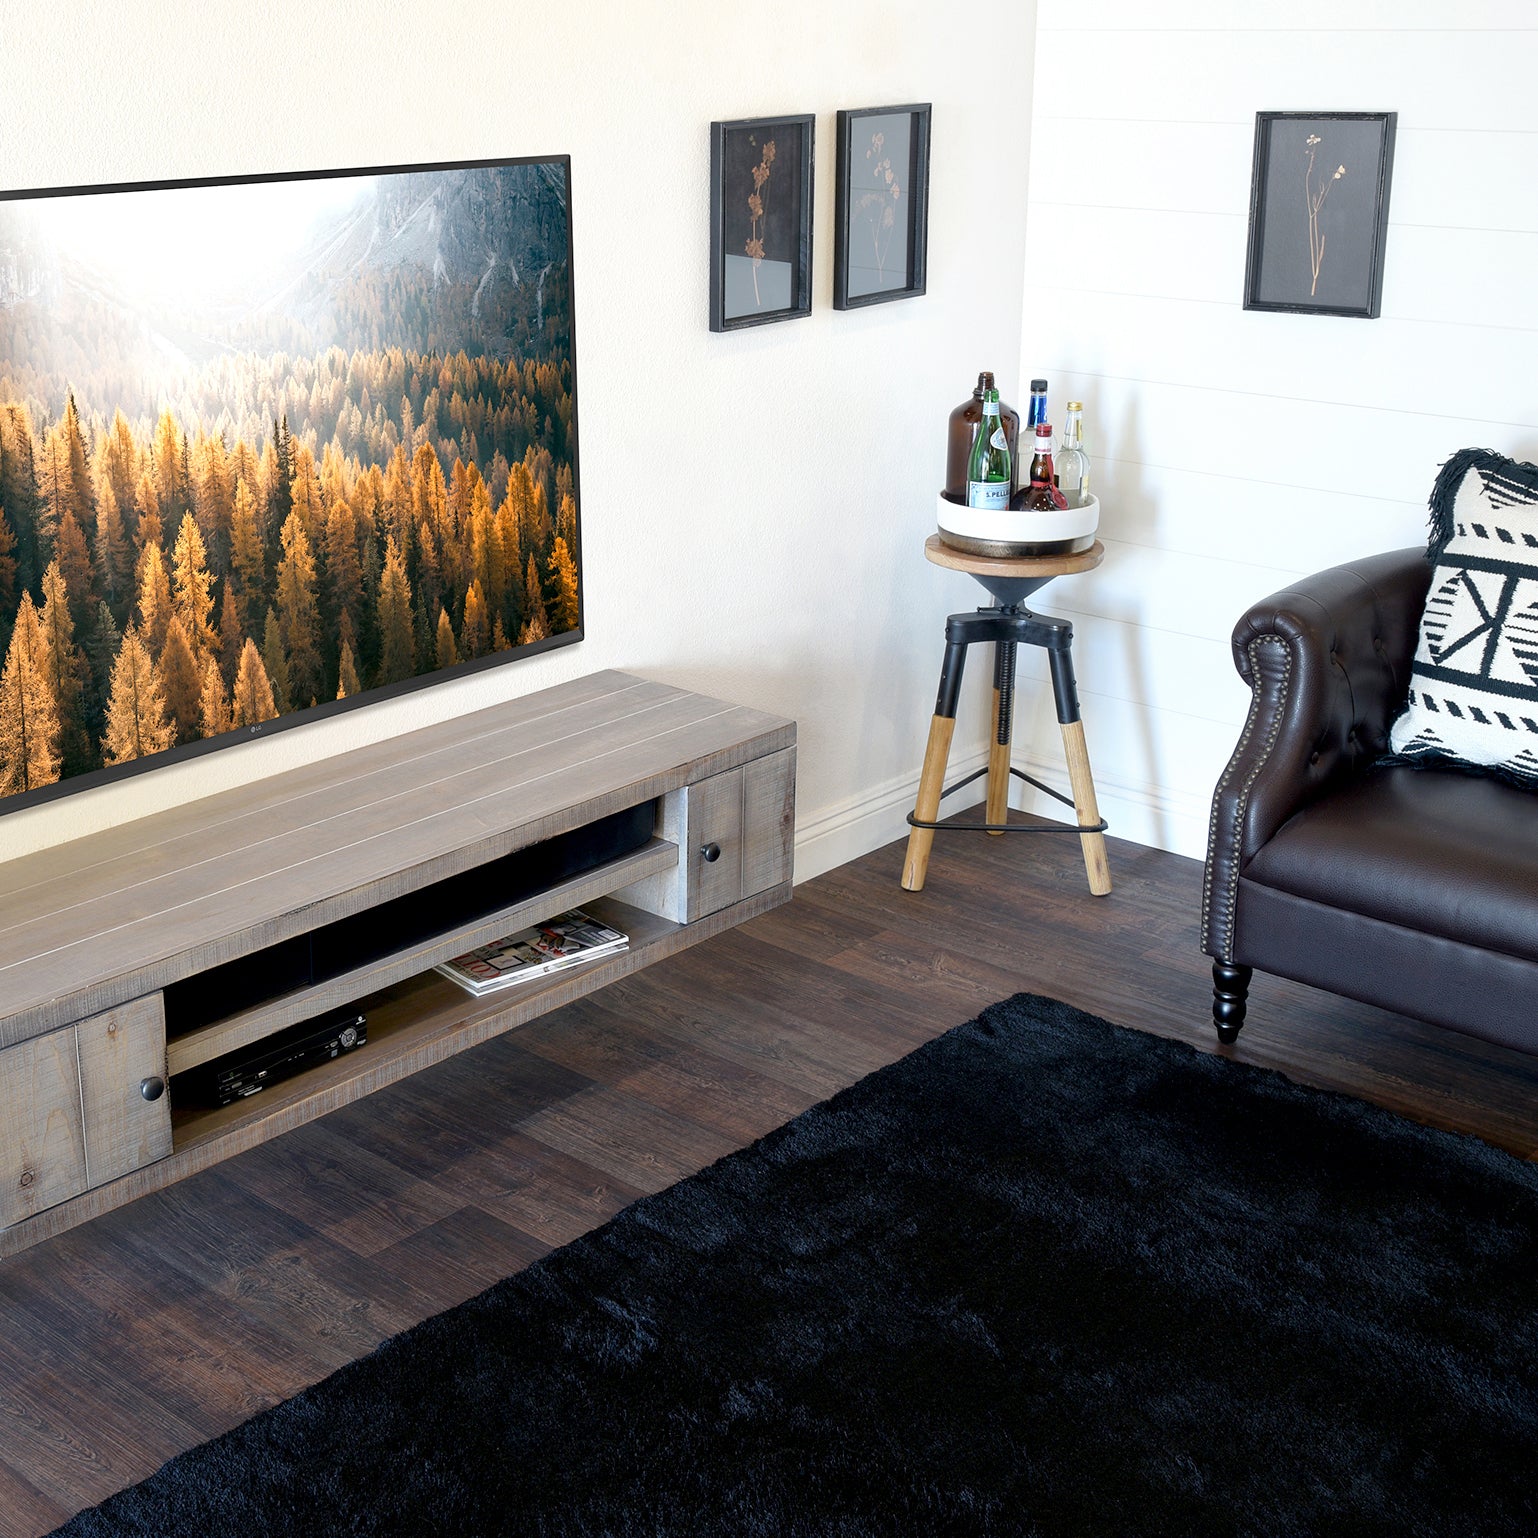 Wall mounting TV hiding wires with barn wood - Country Design Style